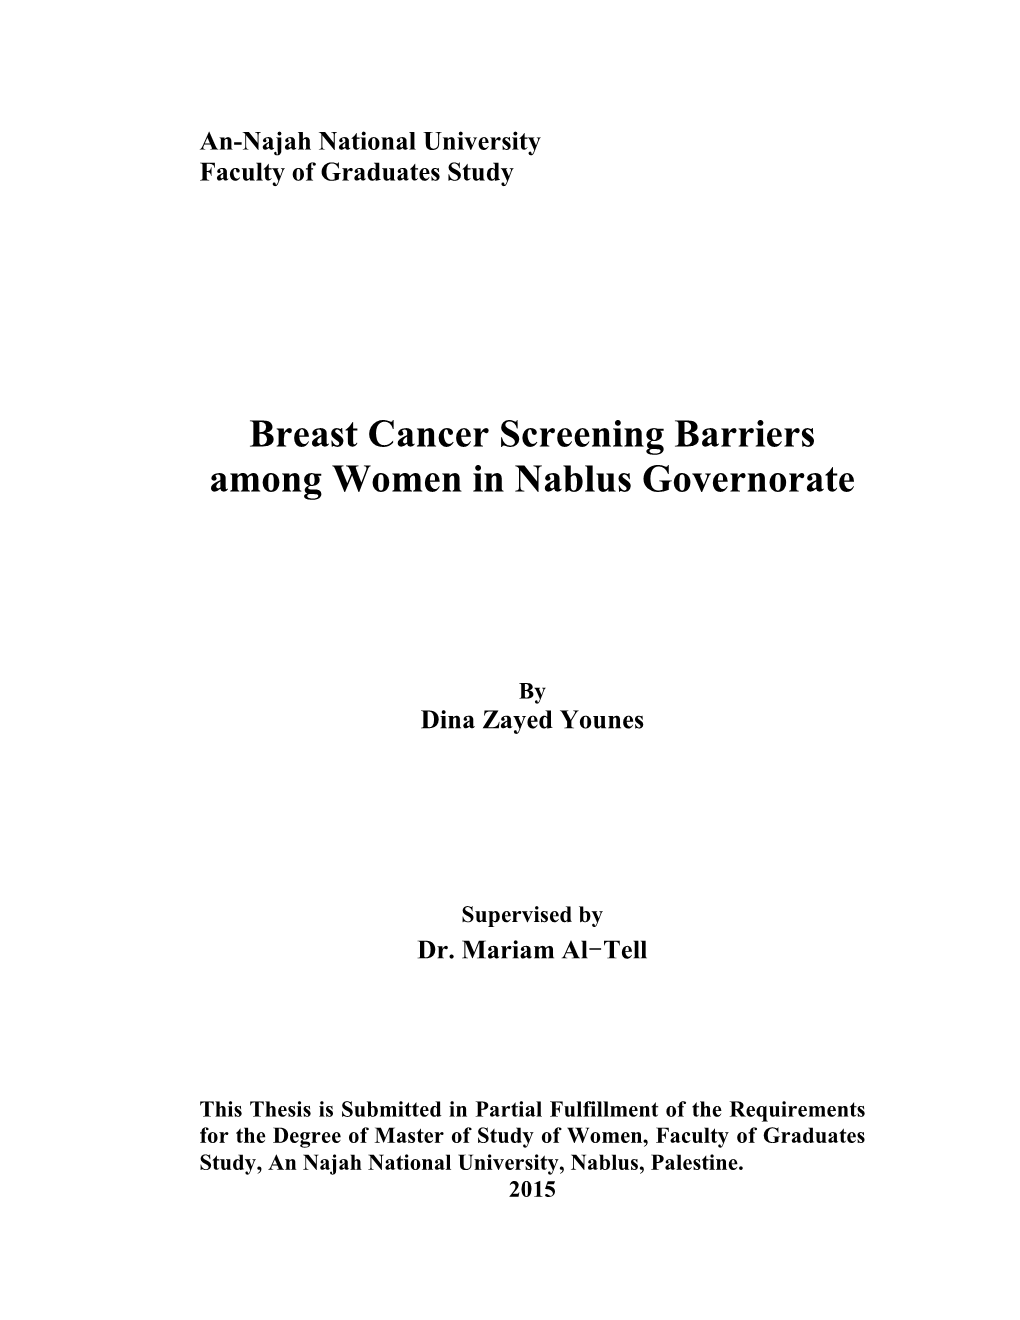 Breast Cancer Screening Barriers Among Women in Nablus Governorate